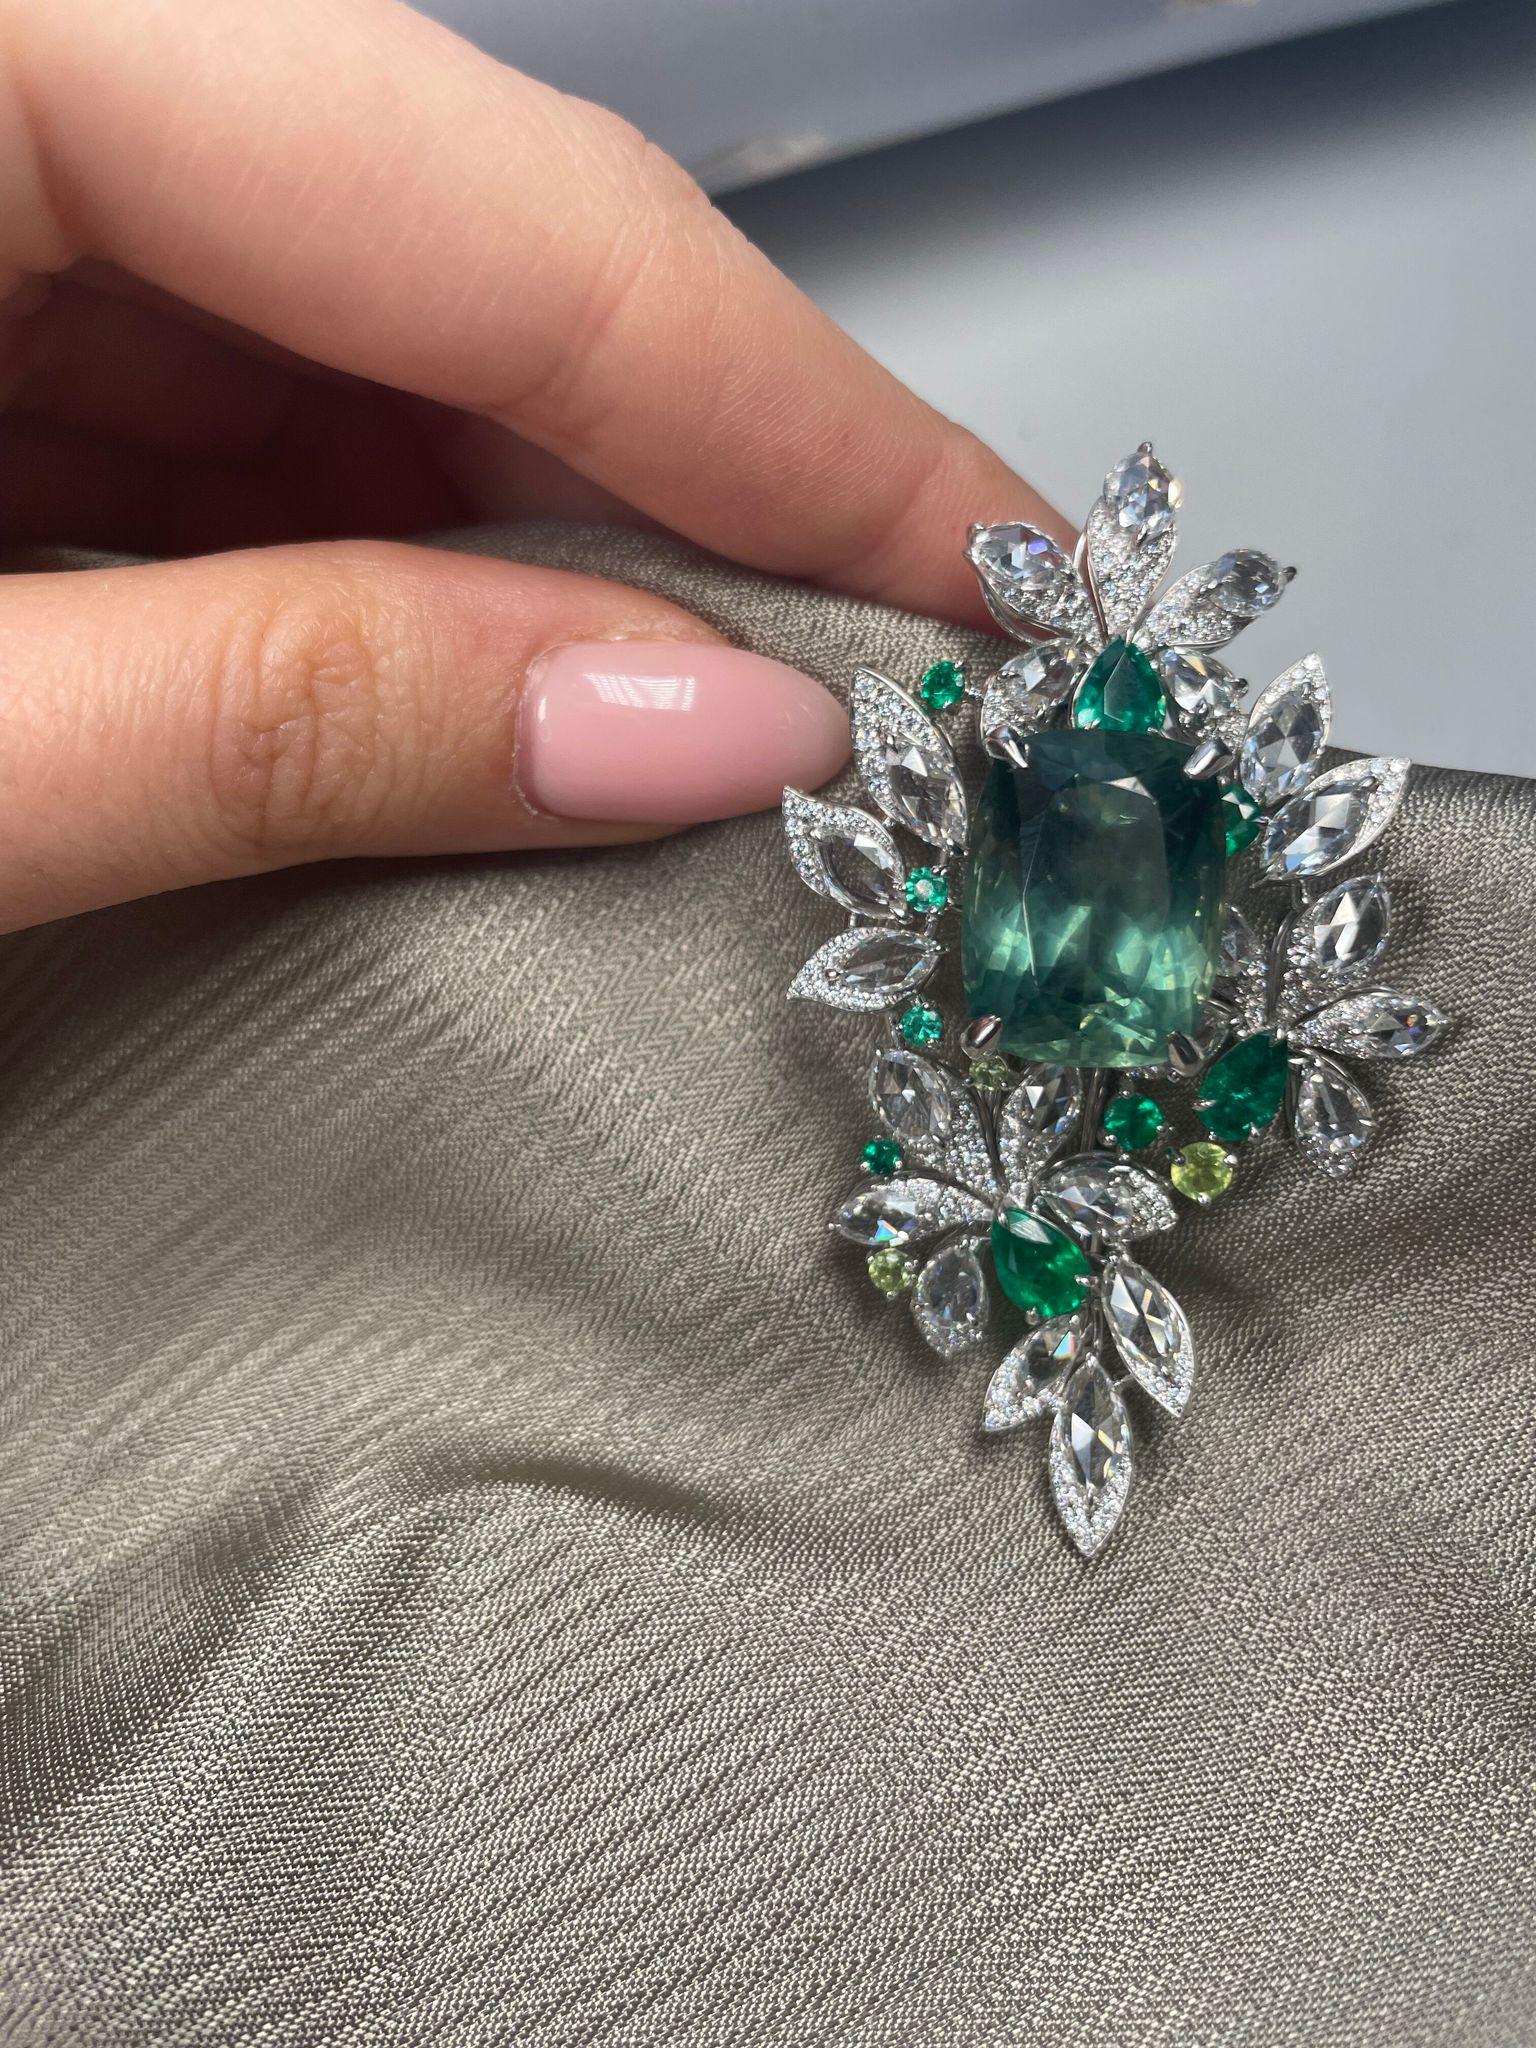 This exquisite piece features 17.26 Carat Green Apatite and 6.09 carat White Diamond Brooch, set in a floral motif. This unique and feminine brooch is crafted in luxurious 18K white gold and features 17 rose cut marquee-shaped diamonds weighing 4.32